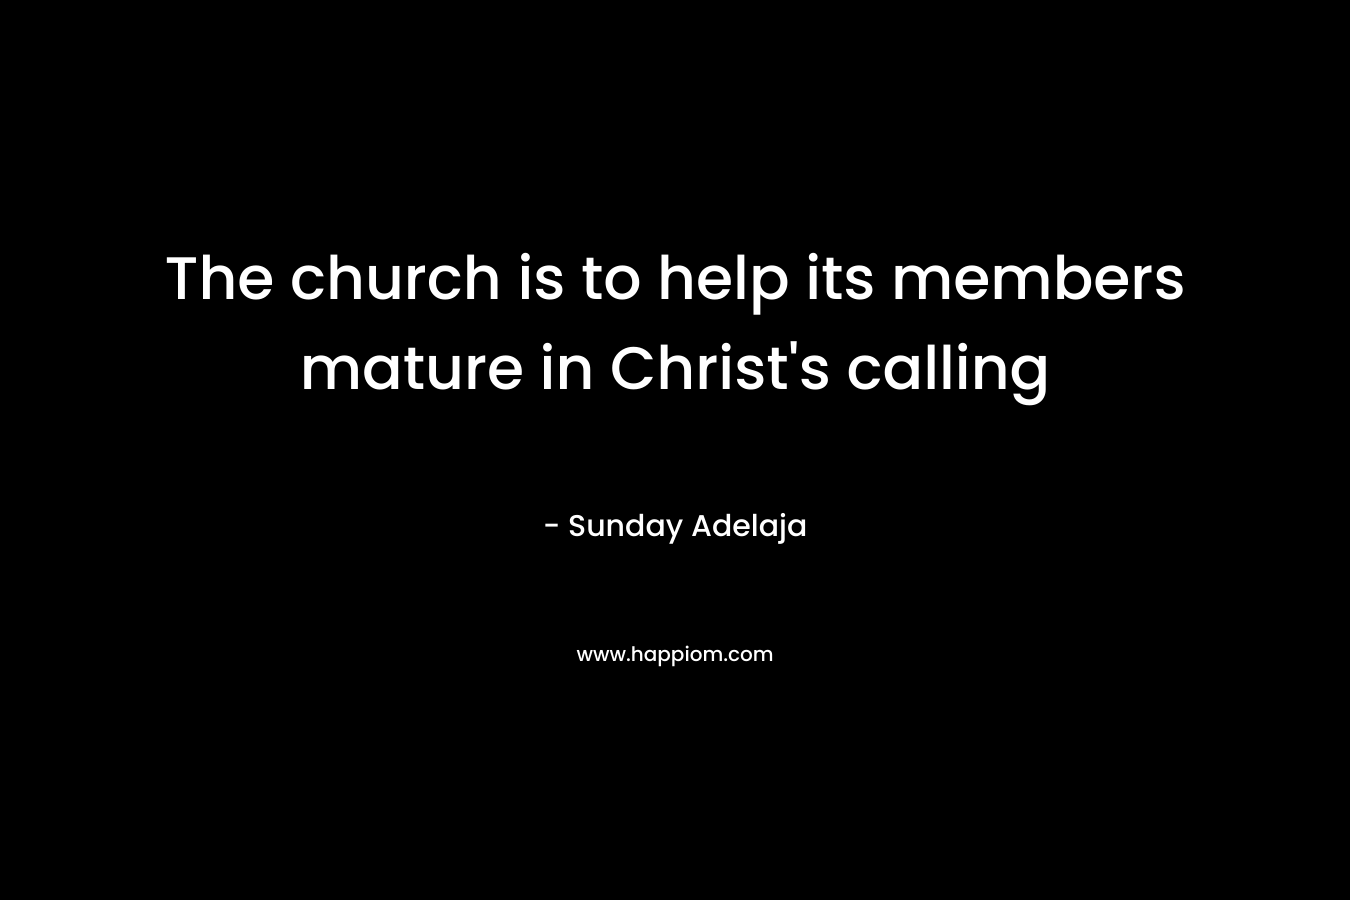 The church is to help its members mature in Christ's calling